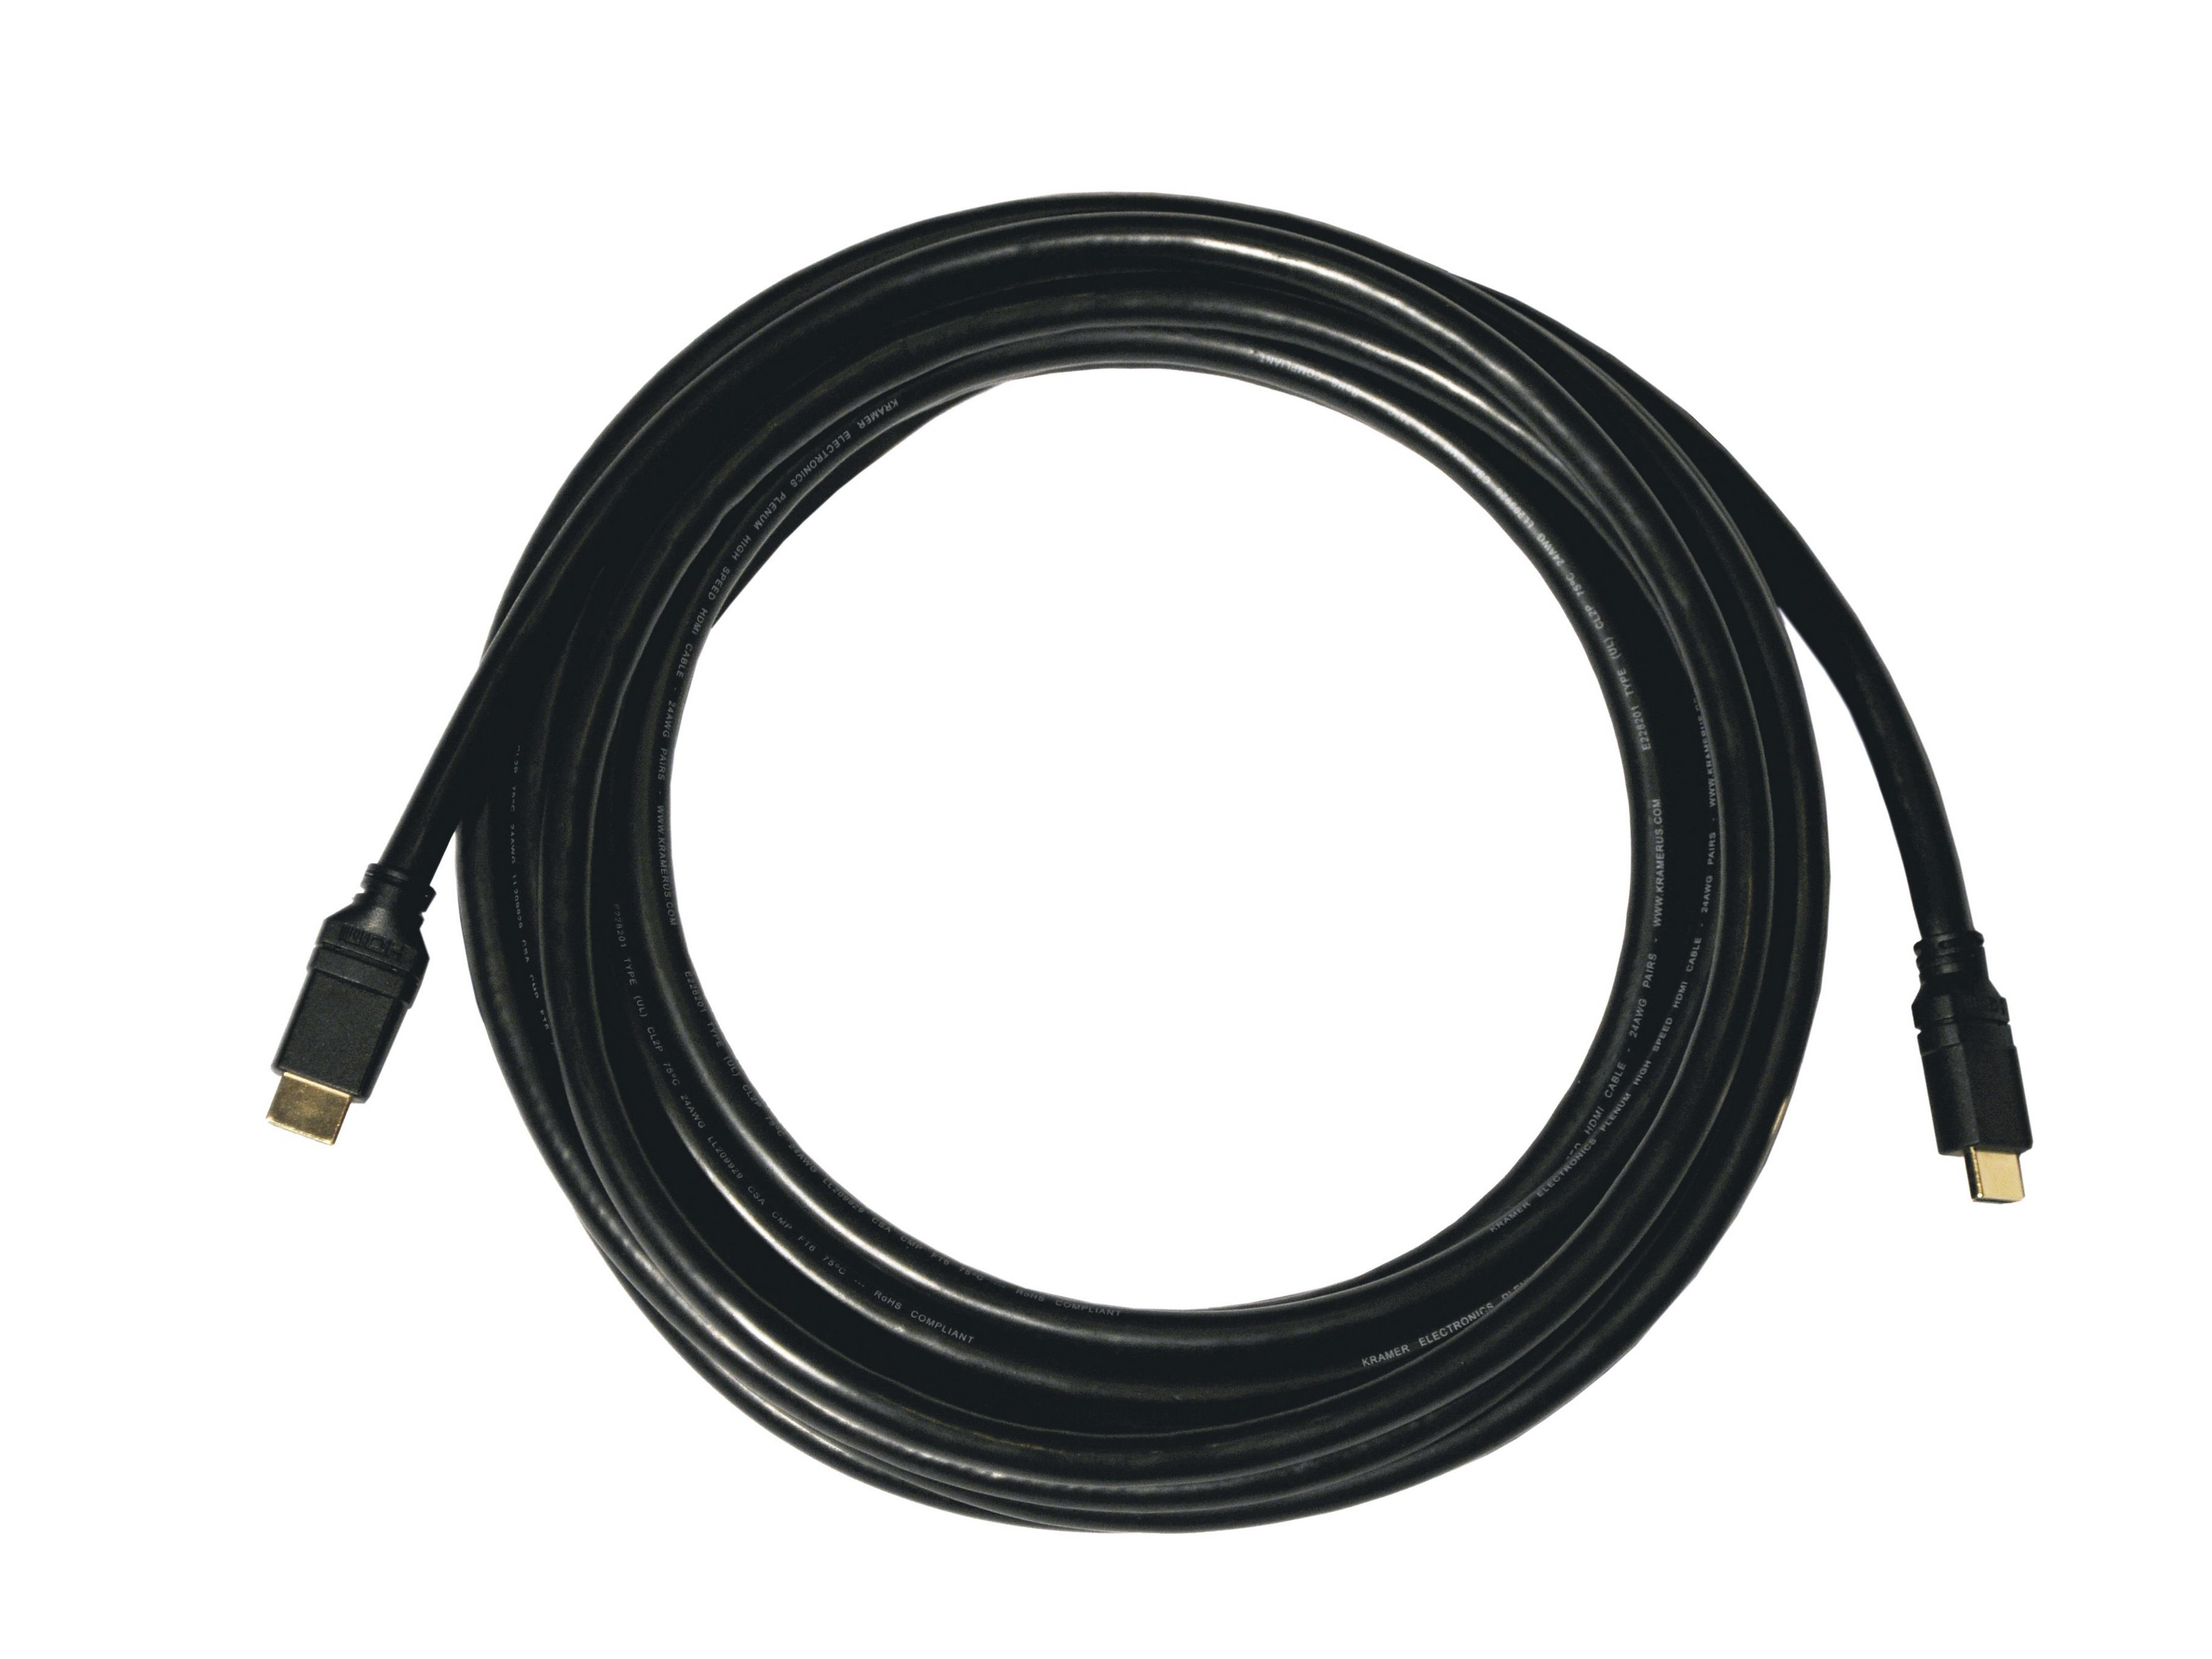 CP-HM/HM/ETH-40 40ft HDMI (M) to HDMI (M) Plenum Rated Cable with Ethernet by Kramer